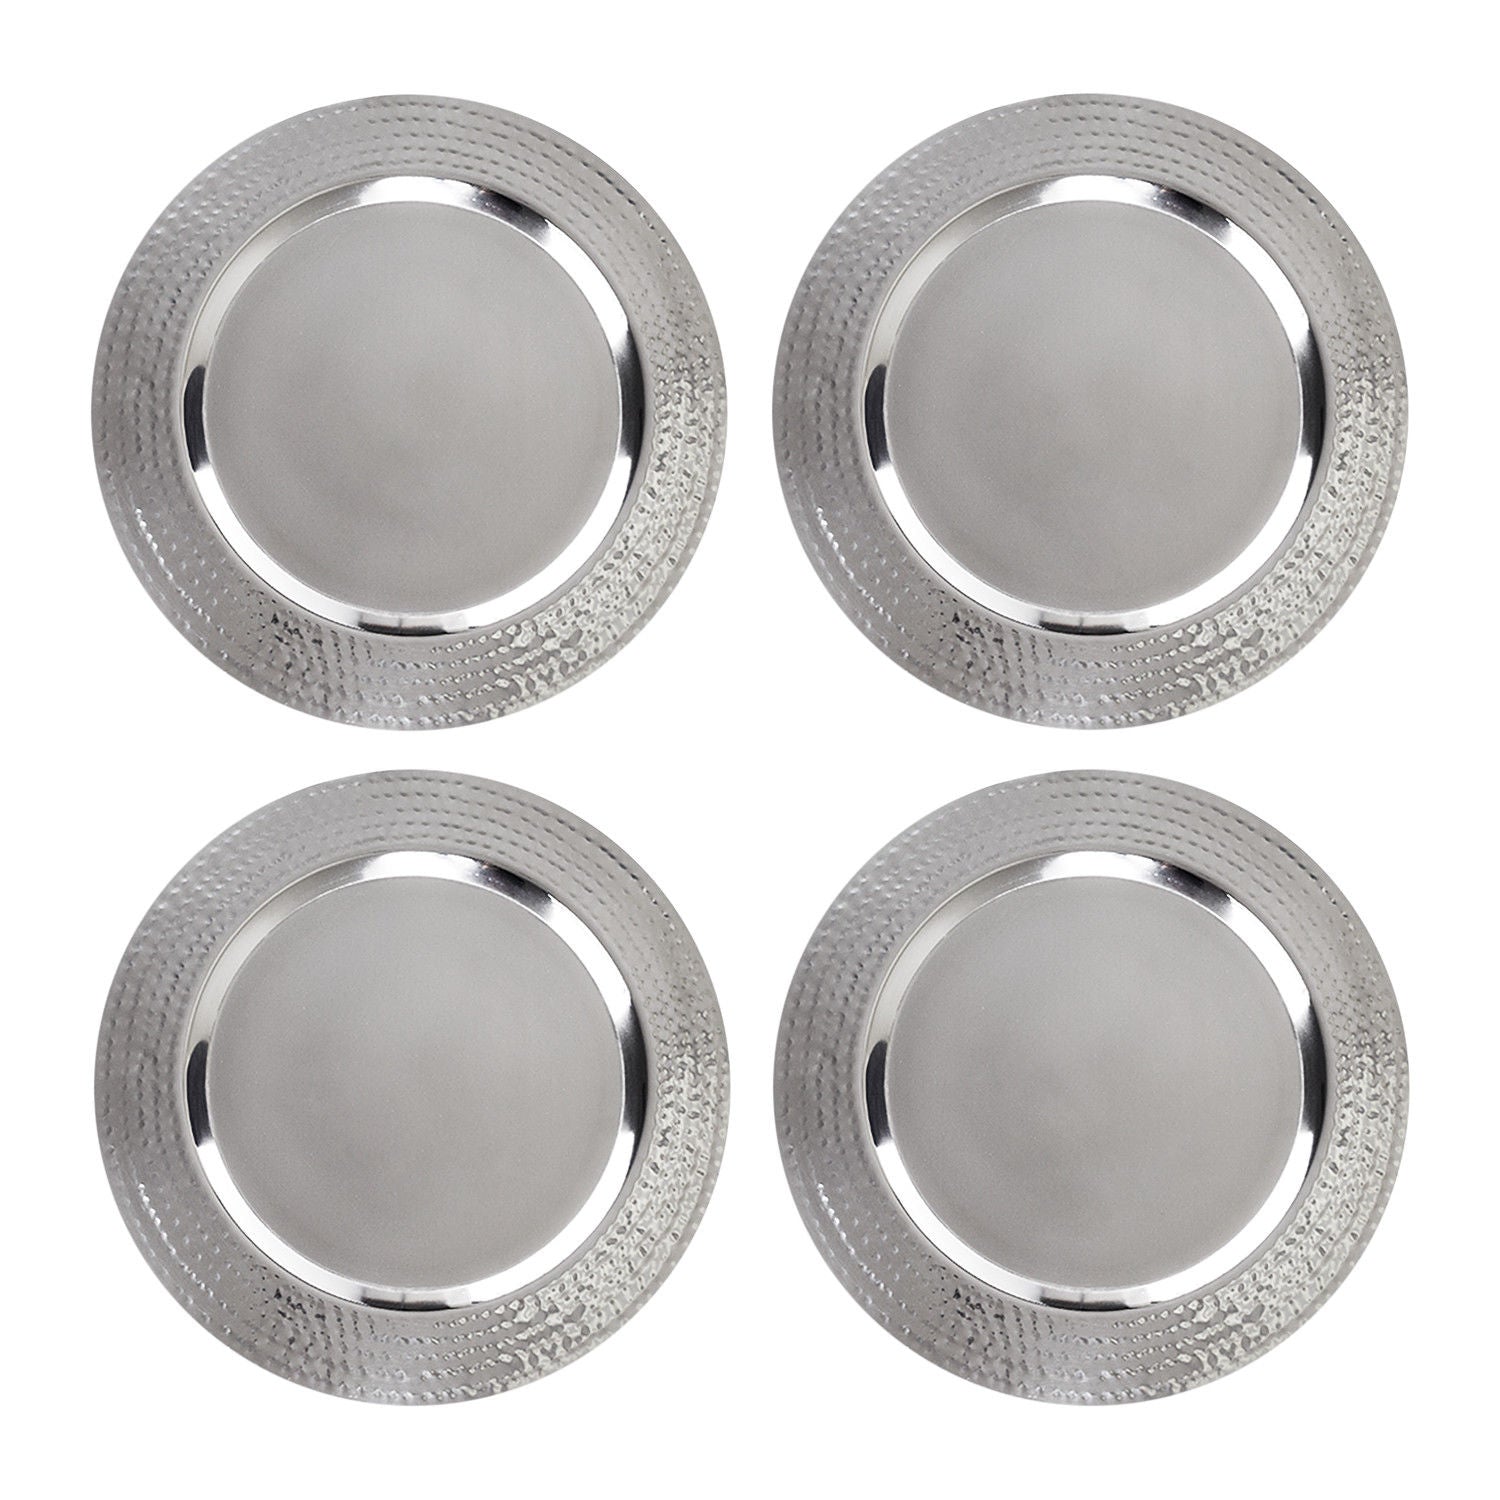 4 Pack Stainless Steel 13" Charger Plate - Large Charger Plate Gold / Silver